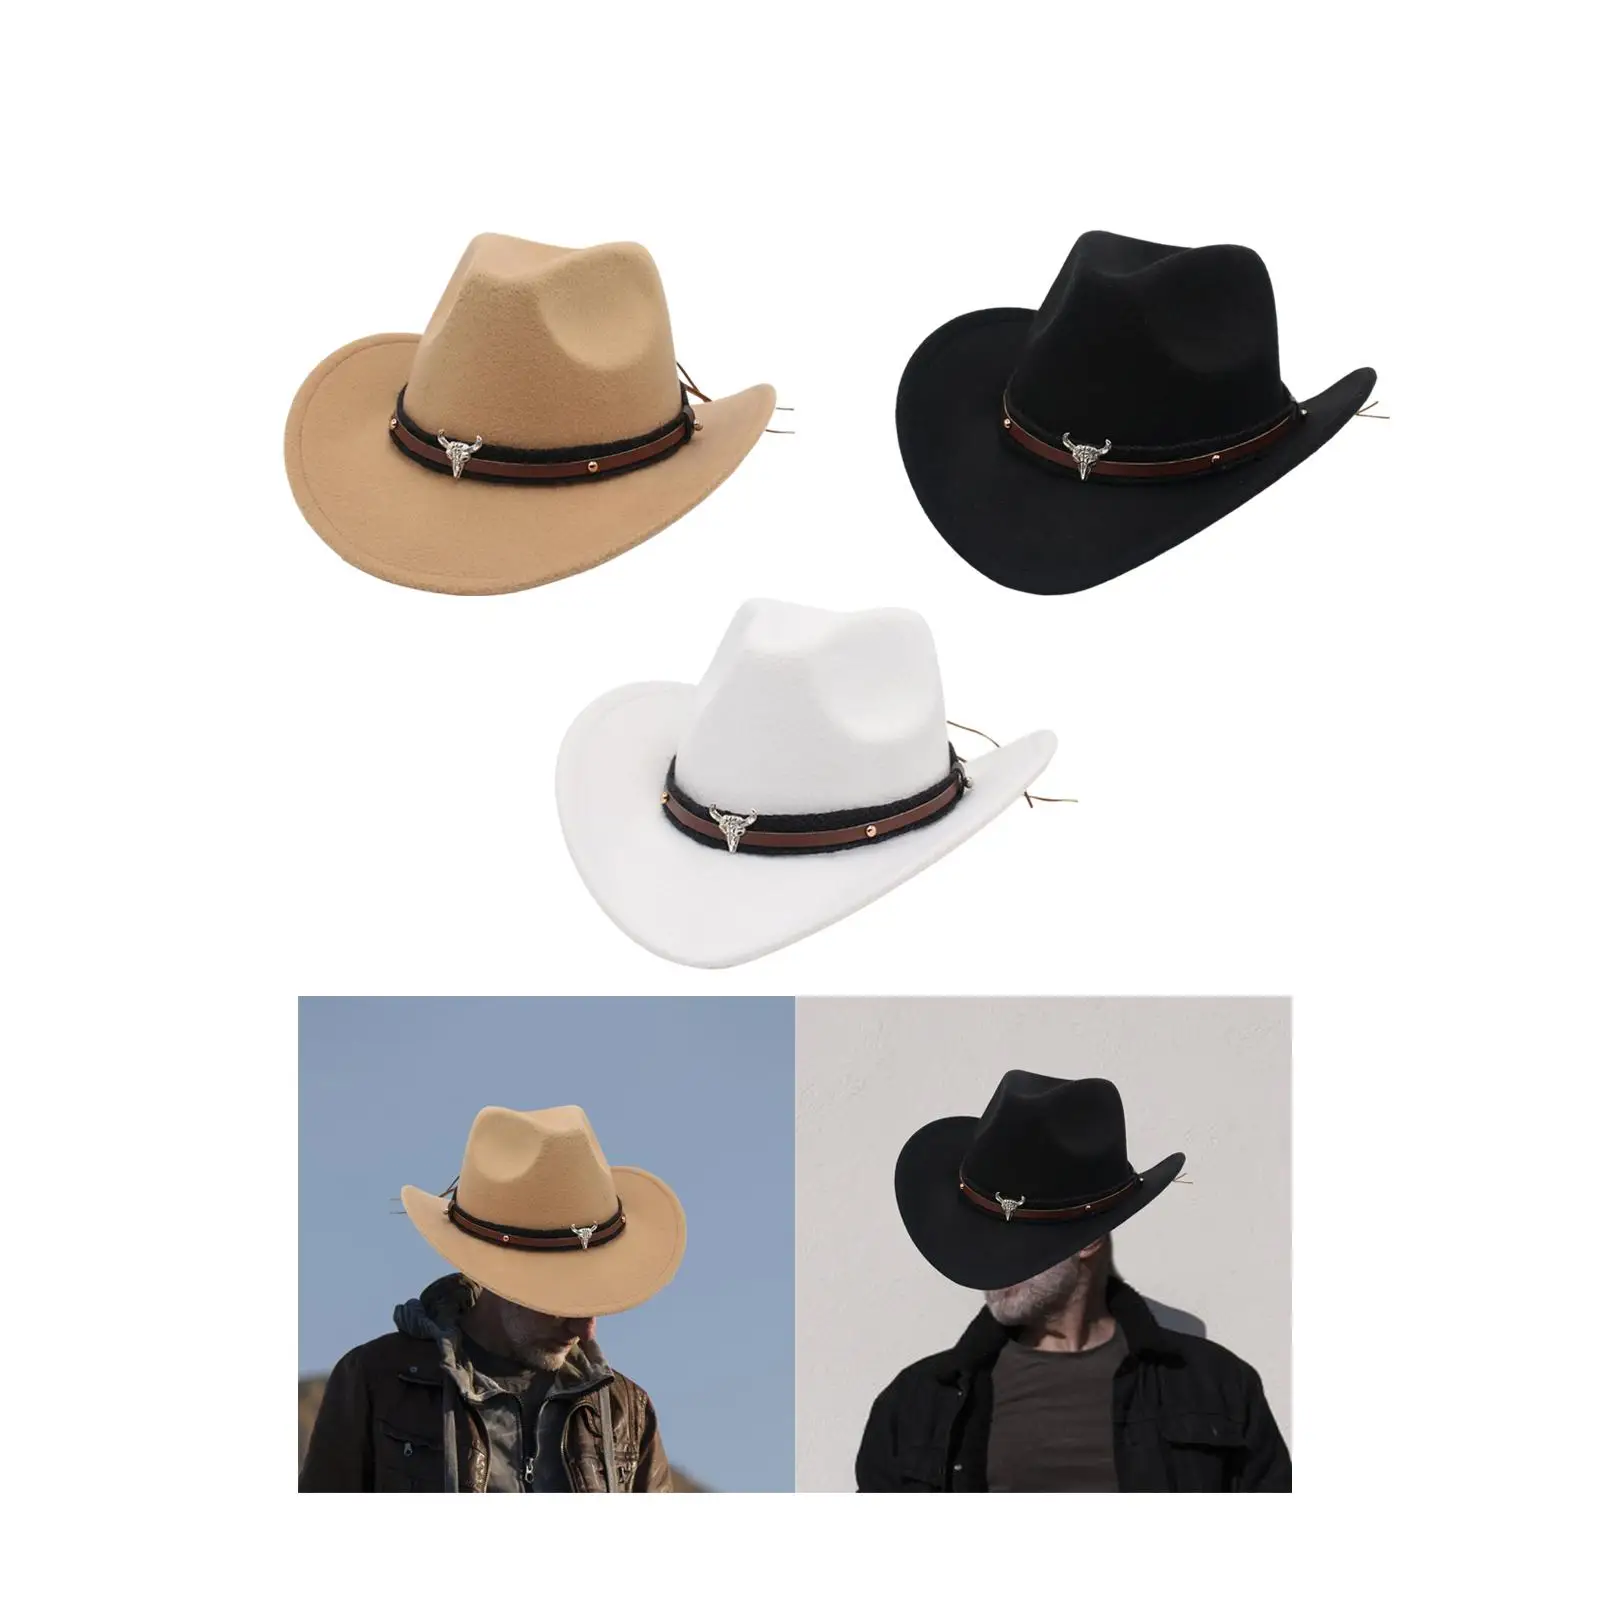  Cowgirl Hat Photo Props Decoration Big Brim Fashion Cosplay Summer Casual Sun Hat for Unisex Travel Rodeo Fishing Hiking